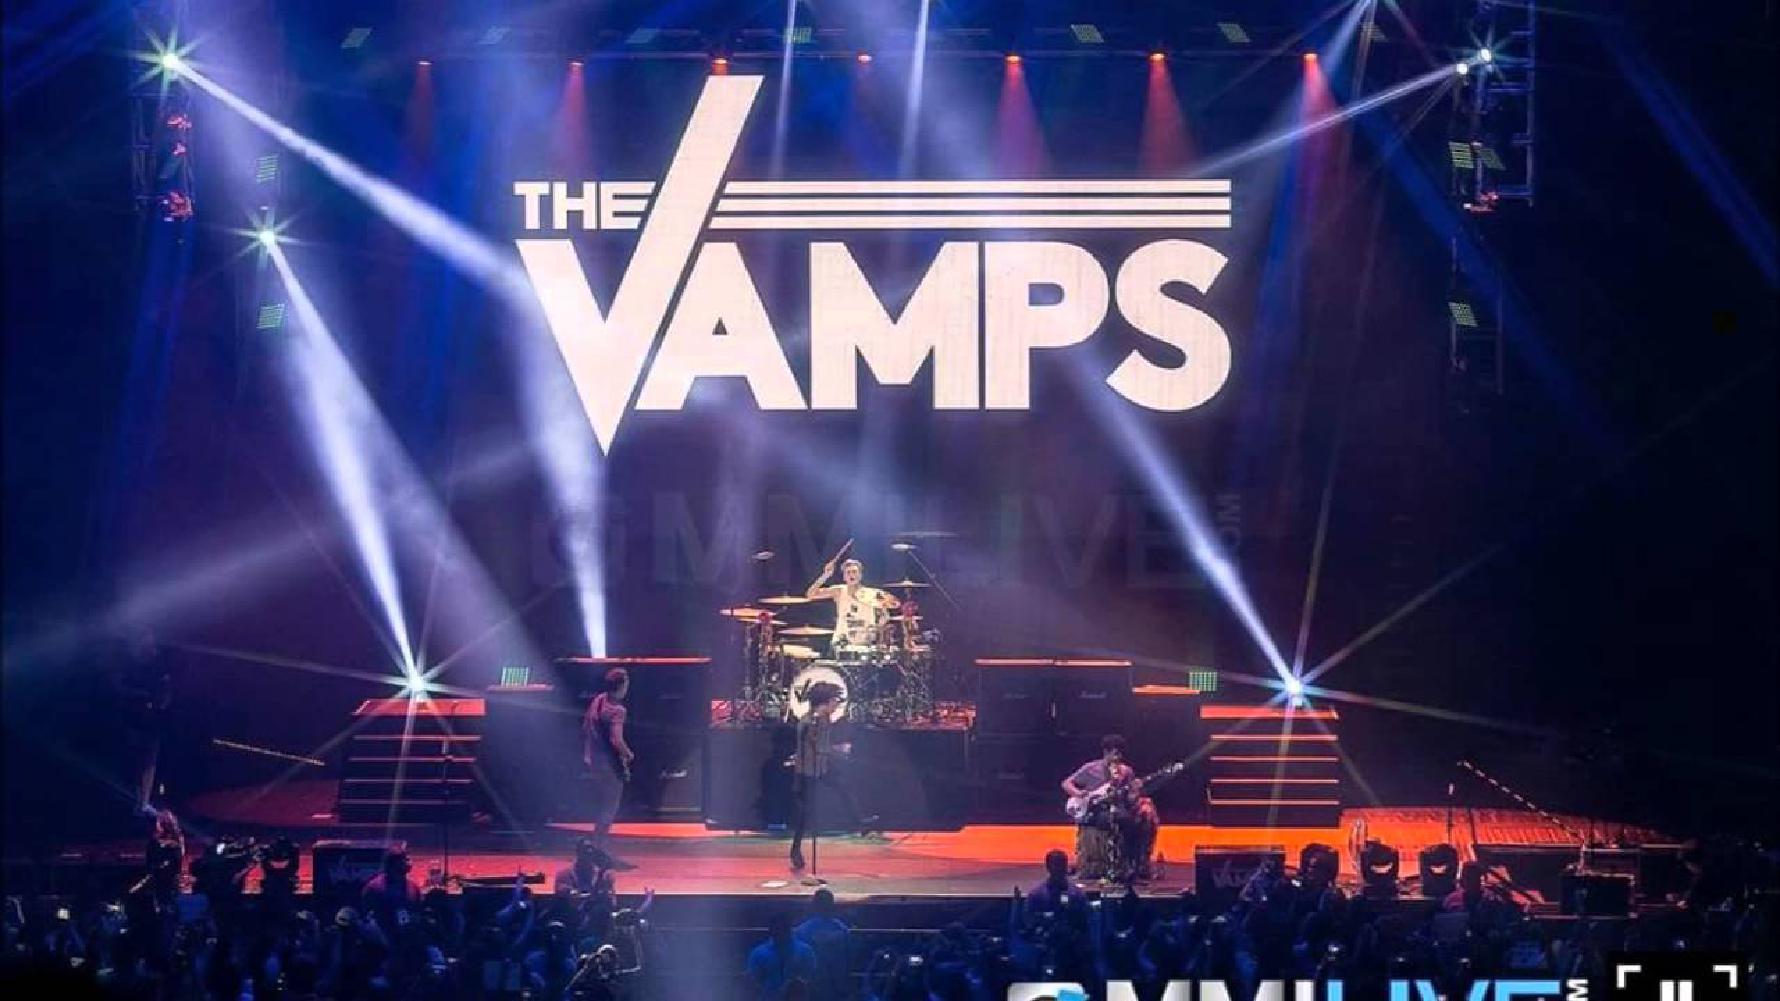 The Vamps Tour Dates 21 22 The Vamps Tickets And Concerts Wegow United States